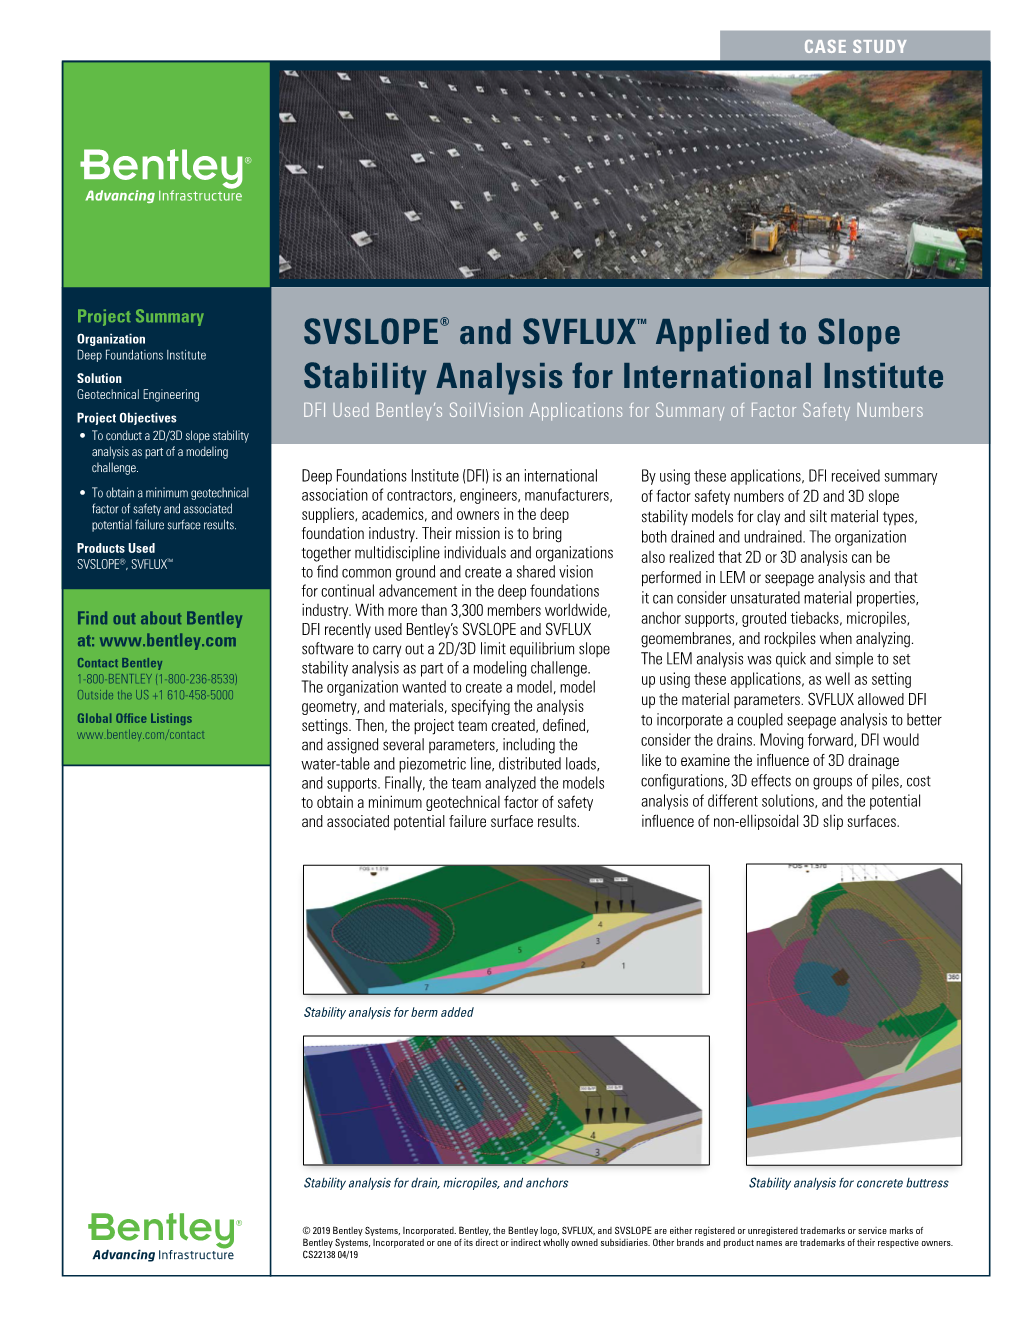 SVSLOPE® and SVFLUX™ Applied to Slope Stability Analysis For